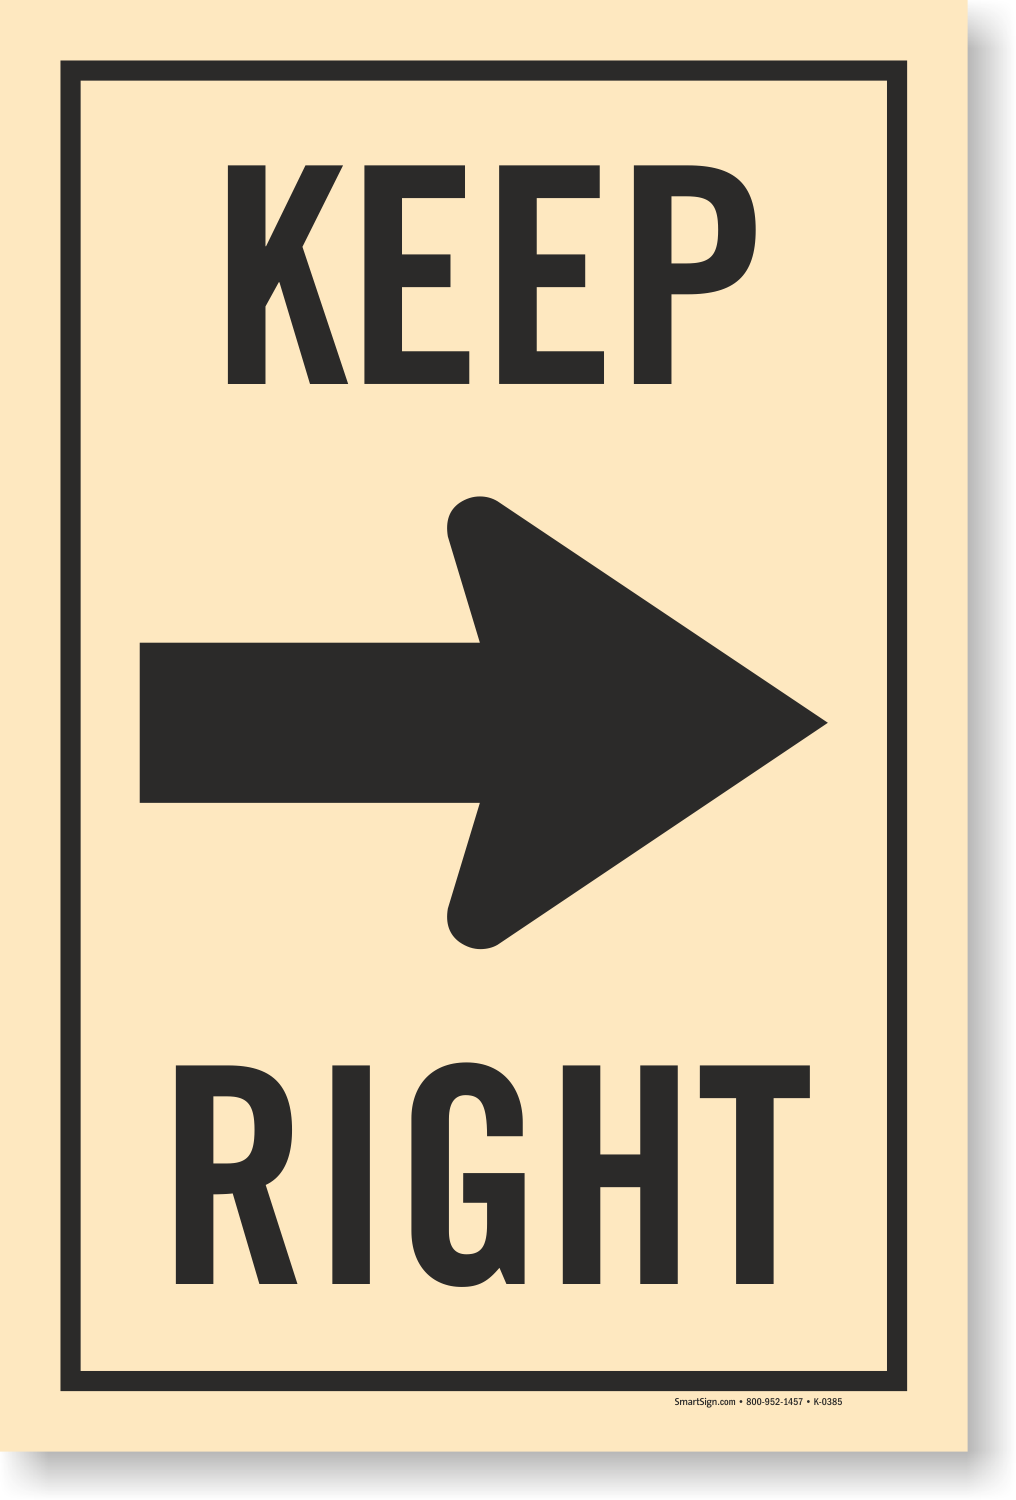 Keep Right Sign - Arrow Direction Sign | Lowest Prices, SKU - K-0385